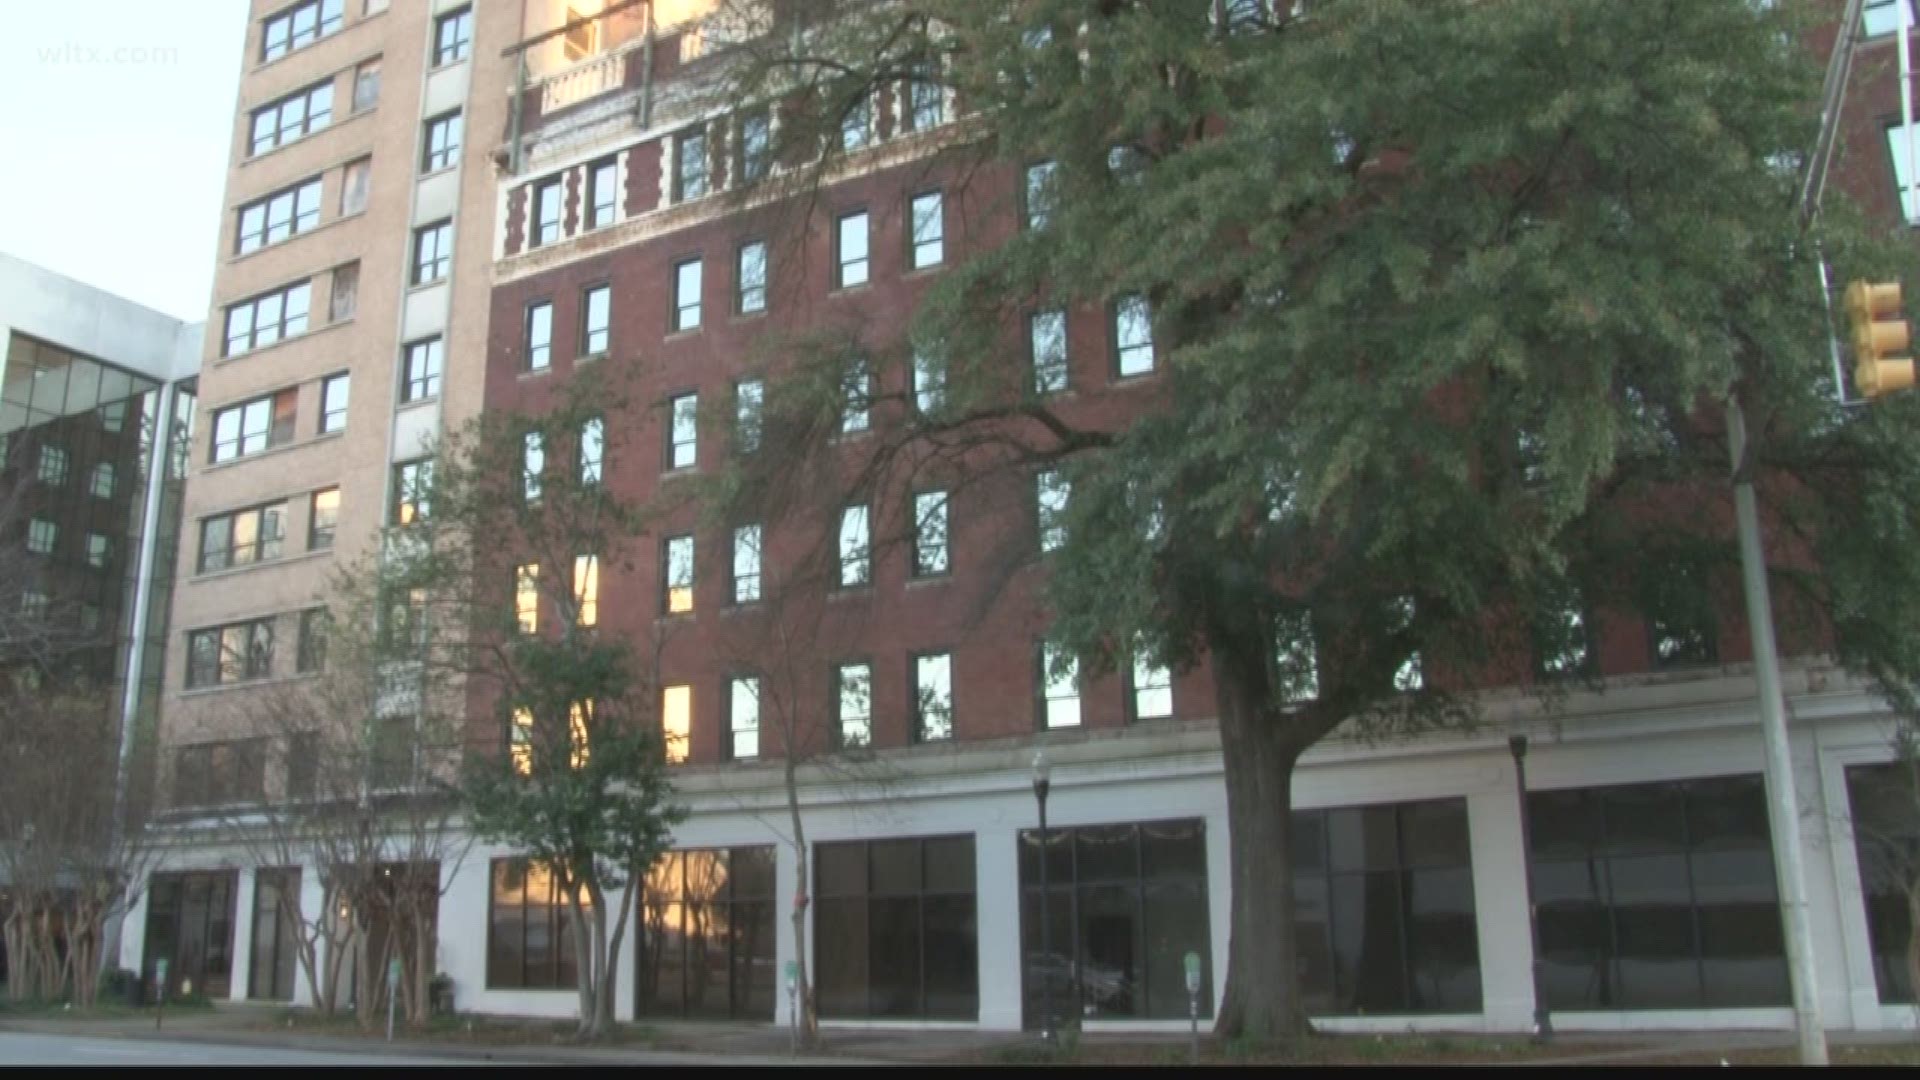 Apartments and retail may come to buildings one block from SC State House